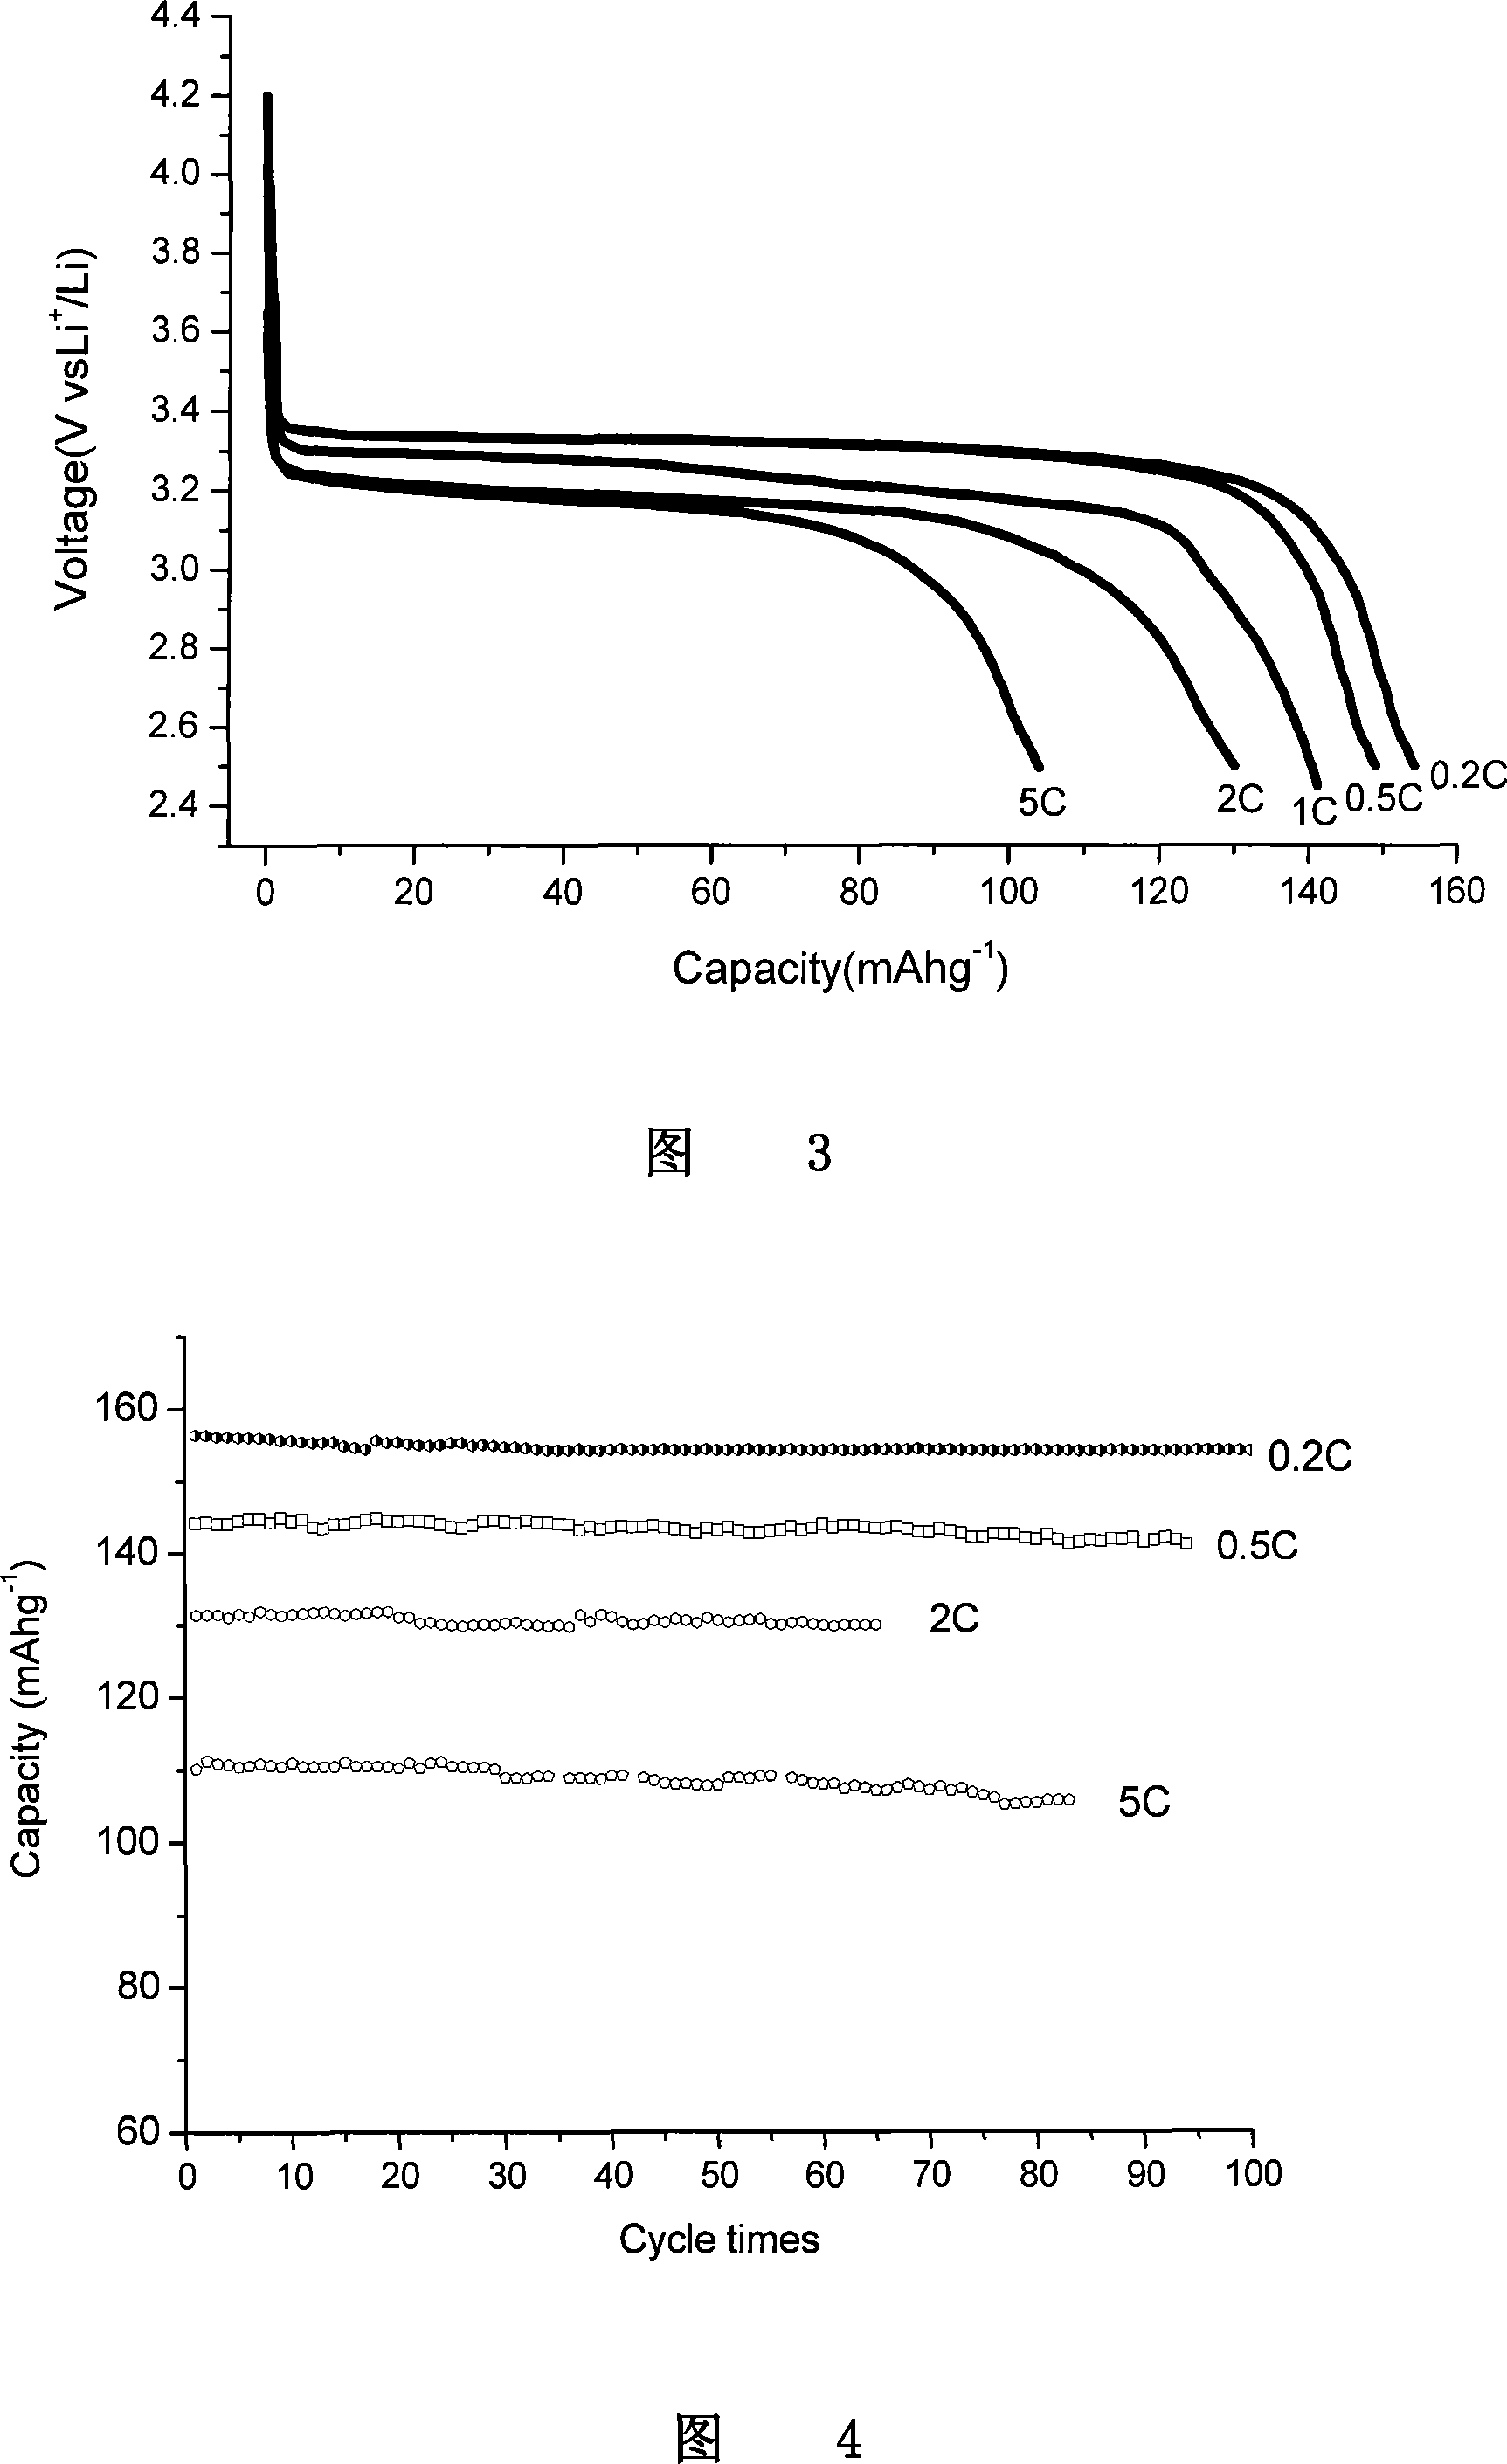 Production method of lithium ion power cell ferrous phosphate lithium composite material